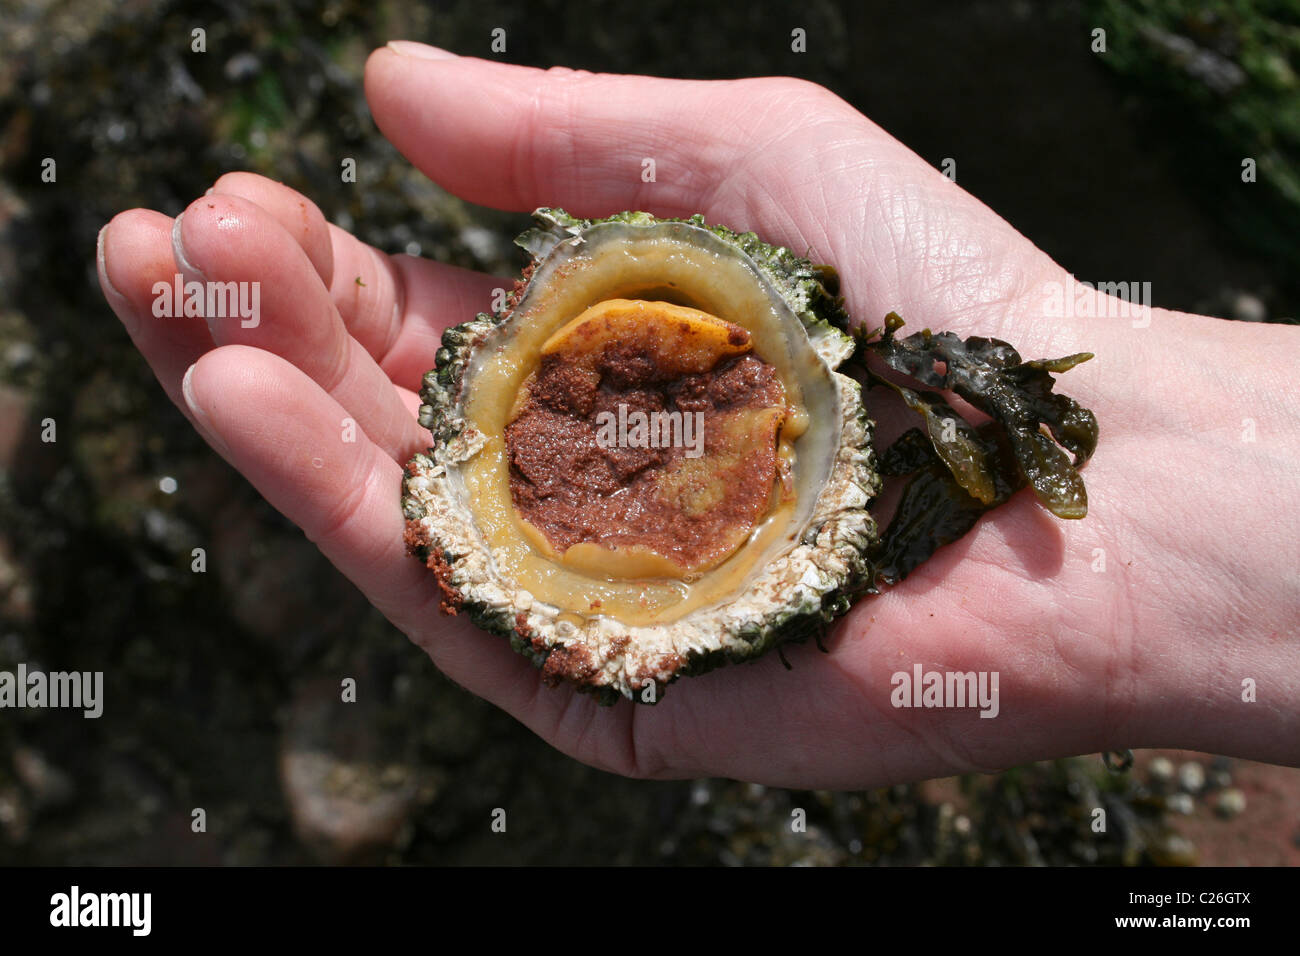 Man Showing The Underside Of A Common Limpet Patella vulgata That Has Been Removed From Its Seashore Rock Stock Photo